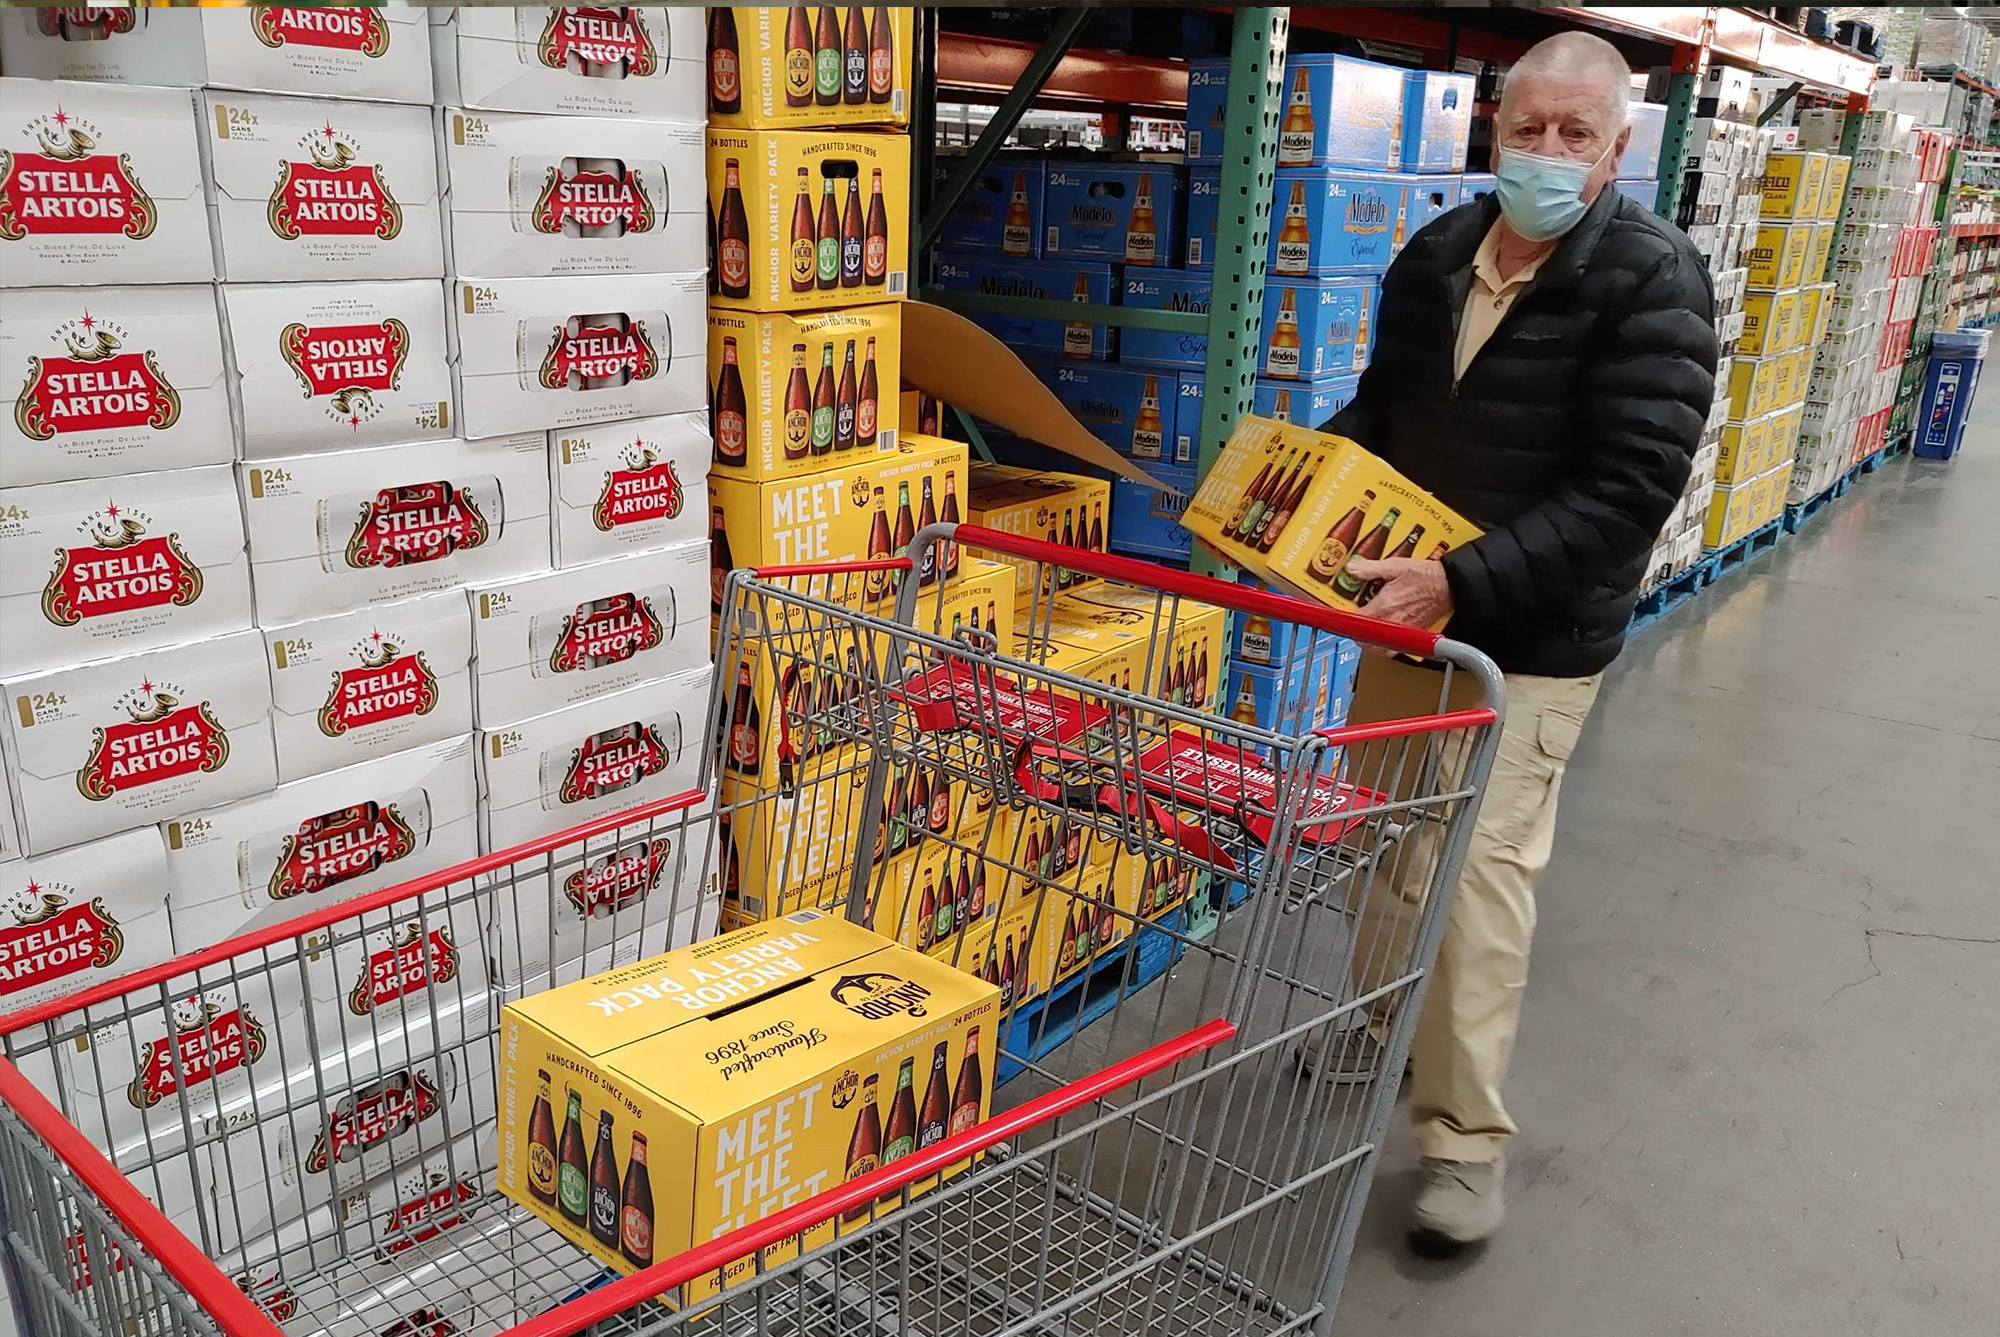 A person in a mask is placing a case of assorted beer bottles into a shopping cart in a store with stacks of Stella Artois and other beer brands.